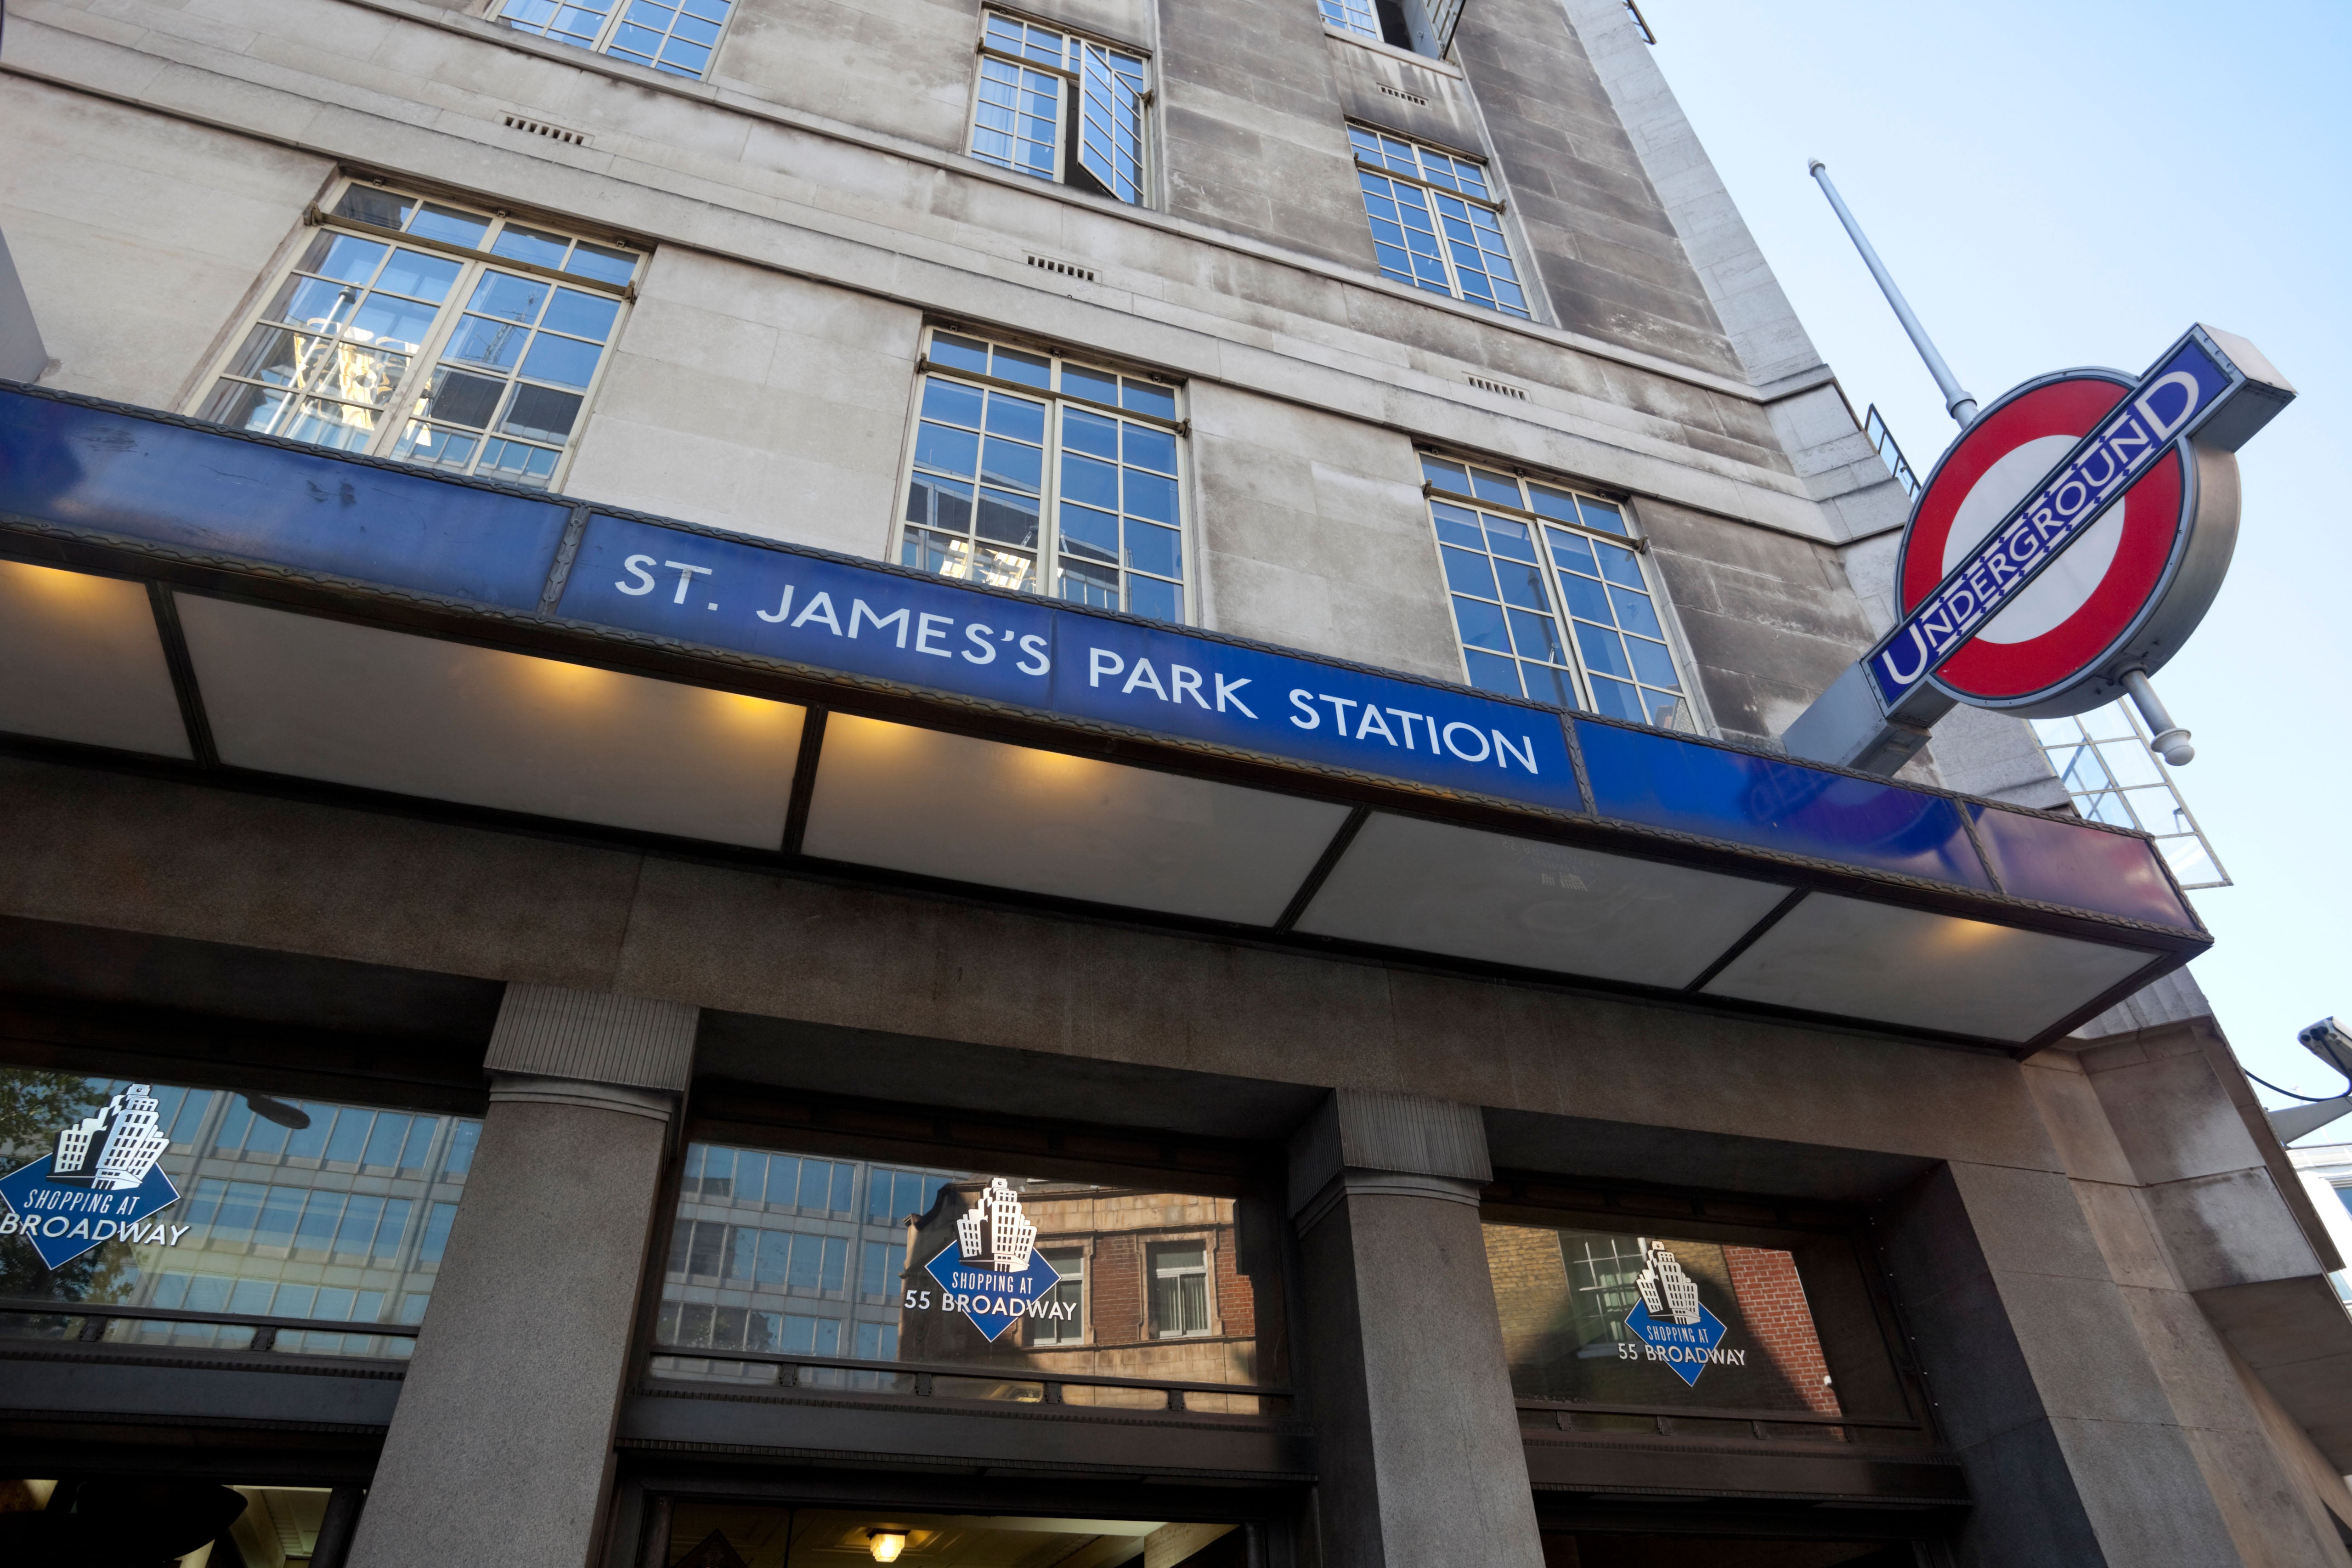 A total of 696,468 entries and exits were recorded at eight central London Tube stations on Wednesday, including St James’s Park (Fotomatador./Alamy Stock Photo/PA)